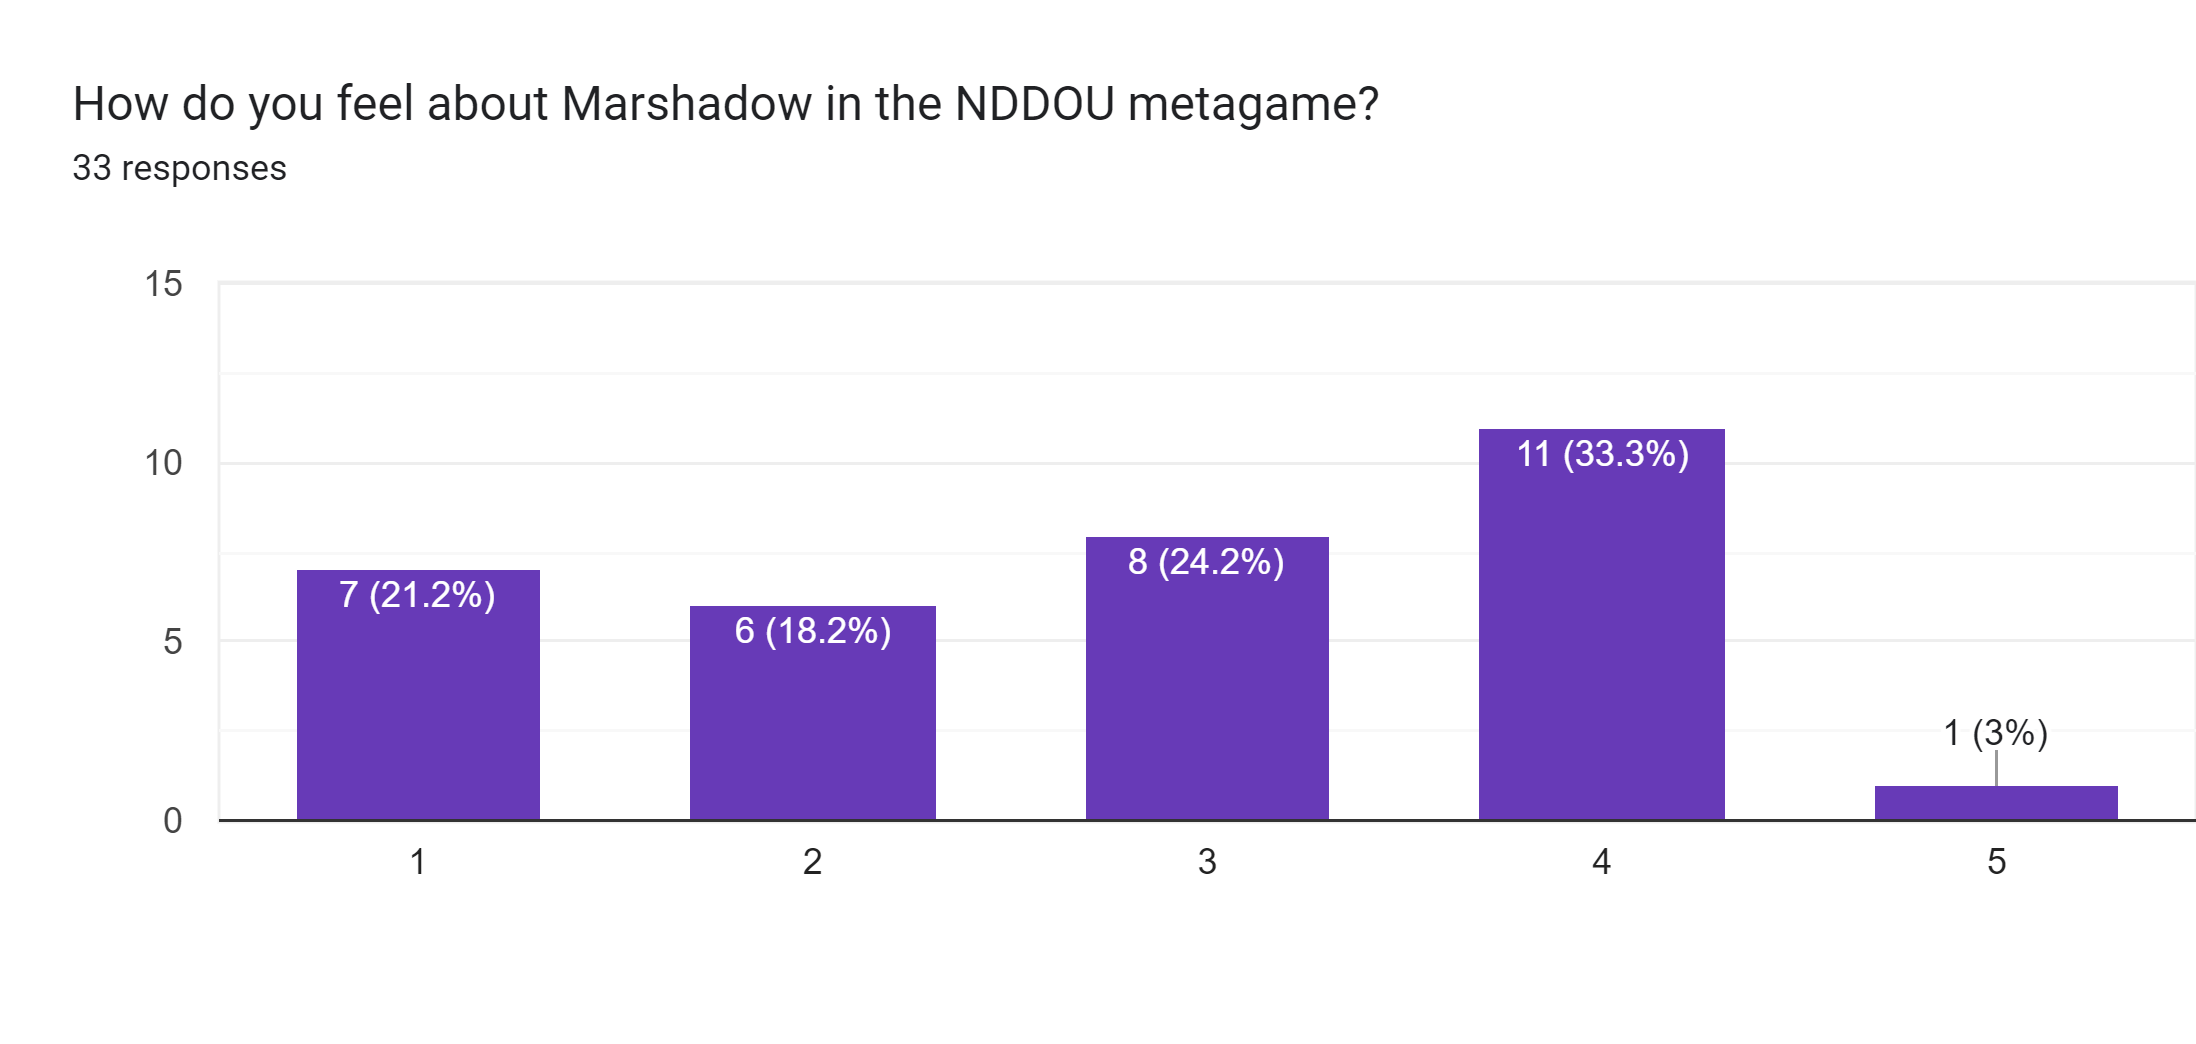 Forms response chart. Question title: How do you feel about Marshadow in the NDDOU metagame?. Number of responses: 33 responses.